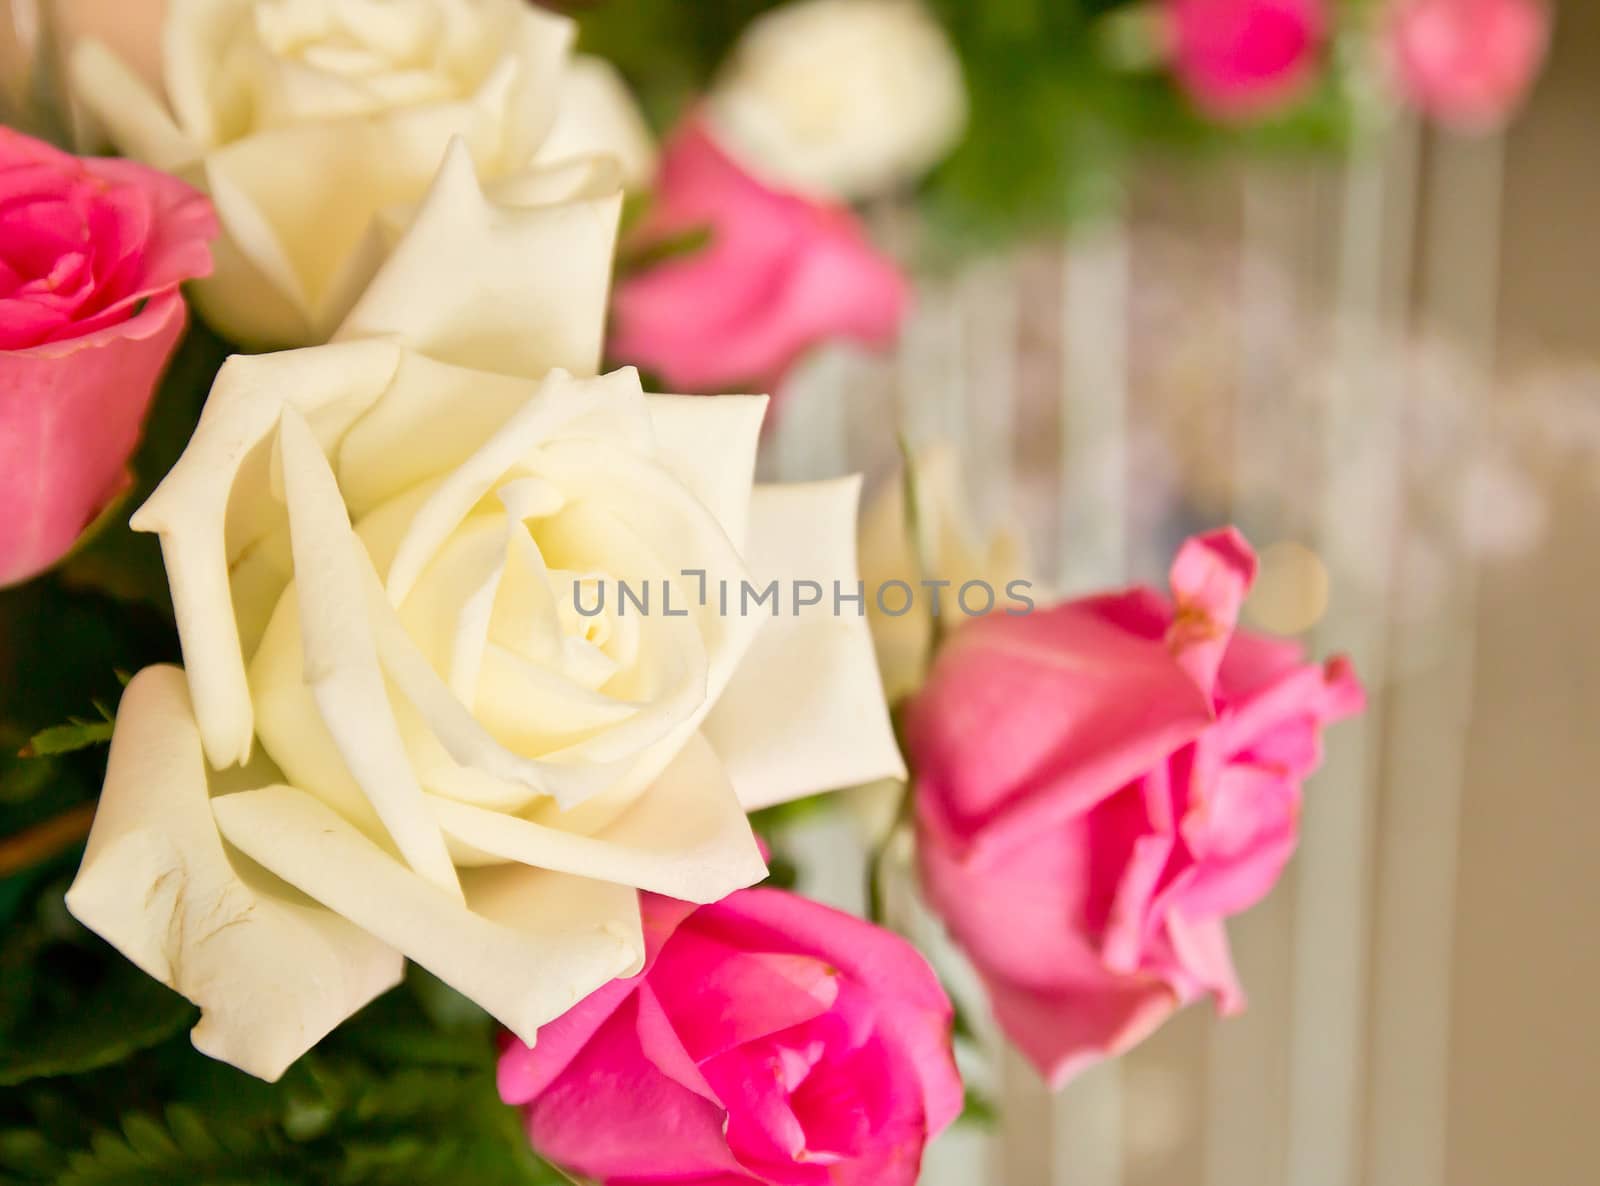 Beautiful white and pink rose close-up